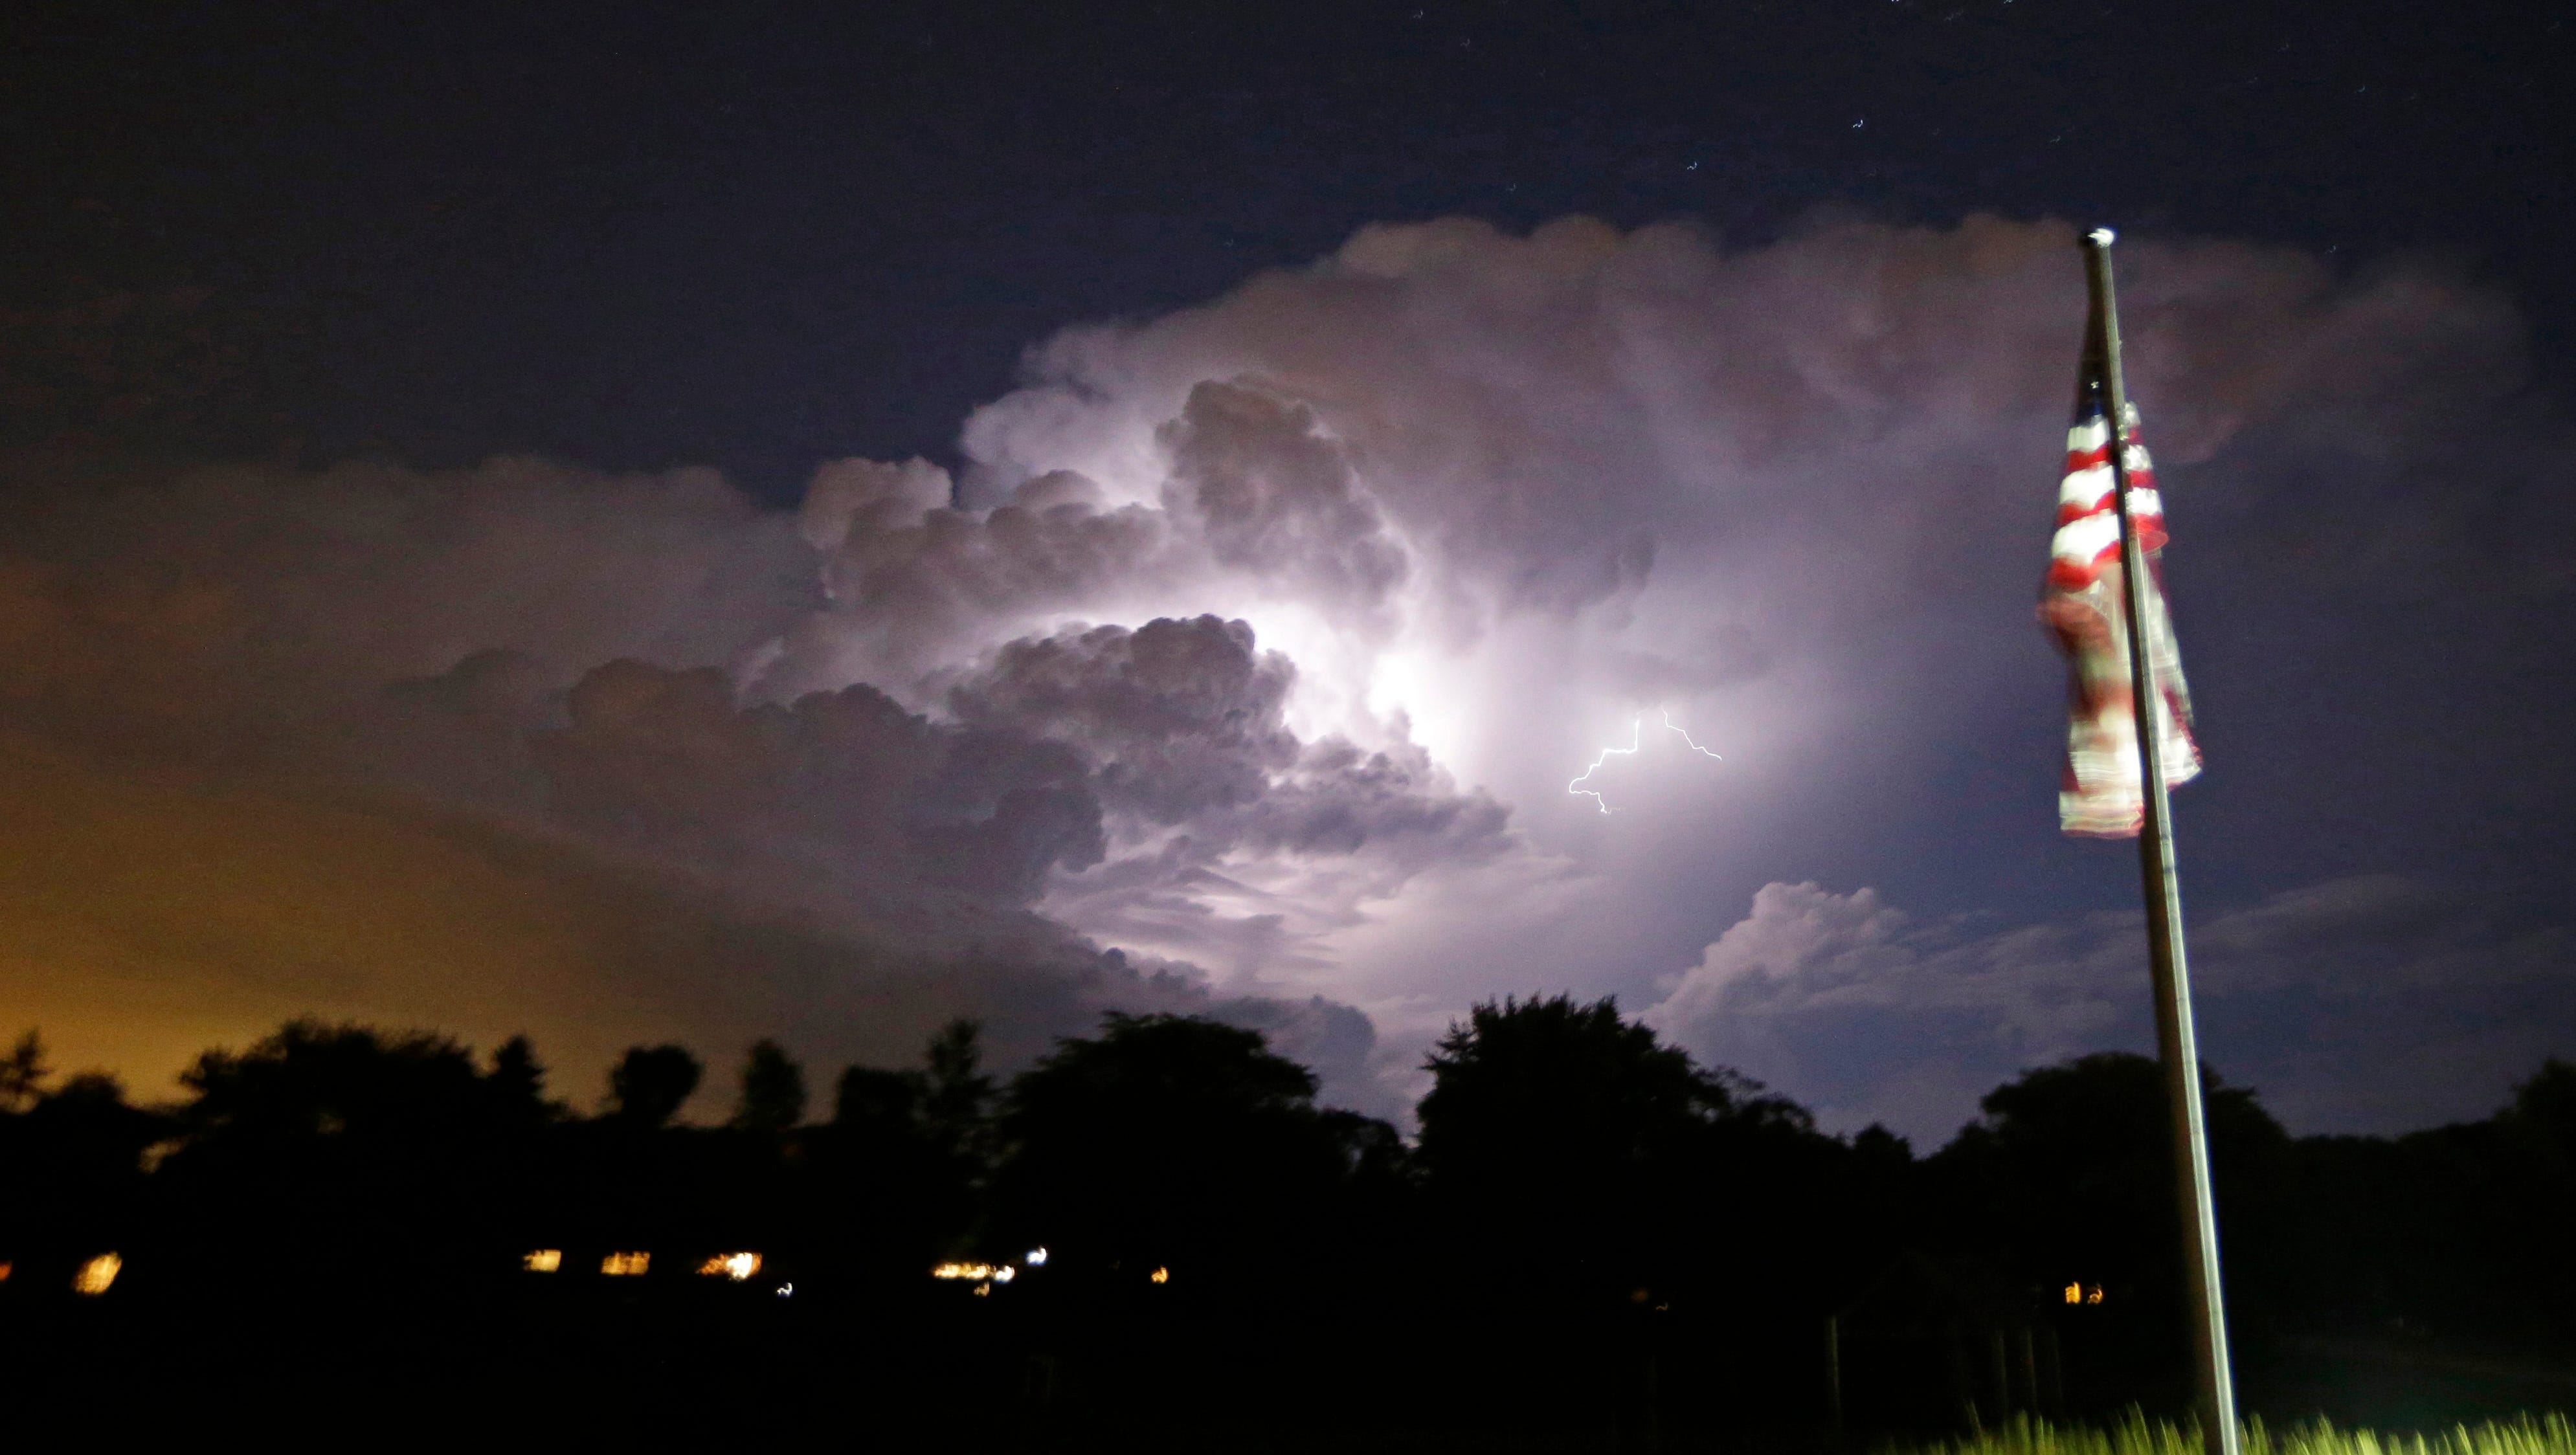 Lightning strikes: Busted myths and shocking truths